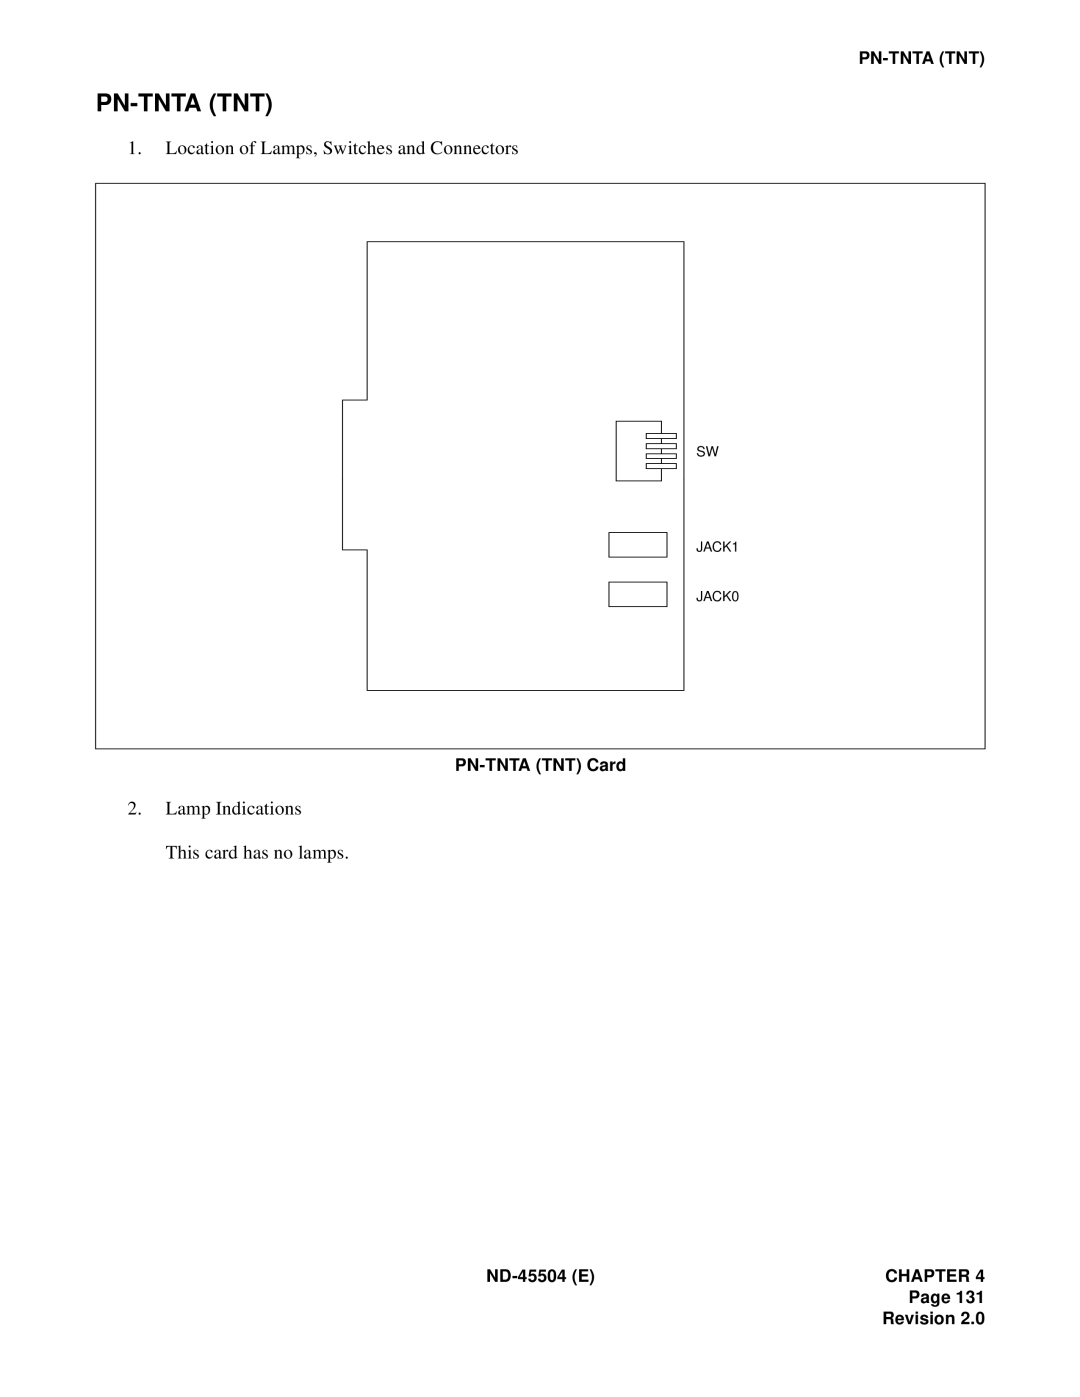 NEC 2000 IVS manual Pn-Tntatnt, Lamp Indications This card has no lamps, Location of Lamps, Switches and Connectors 